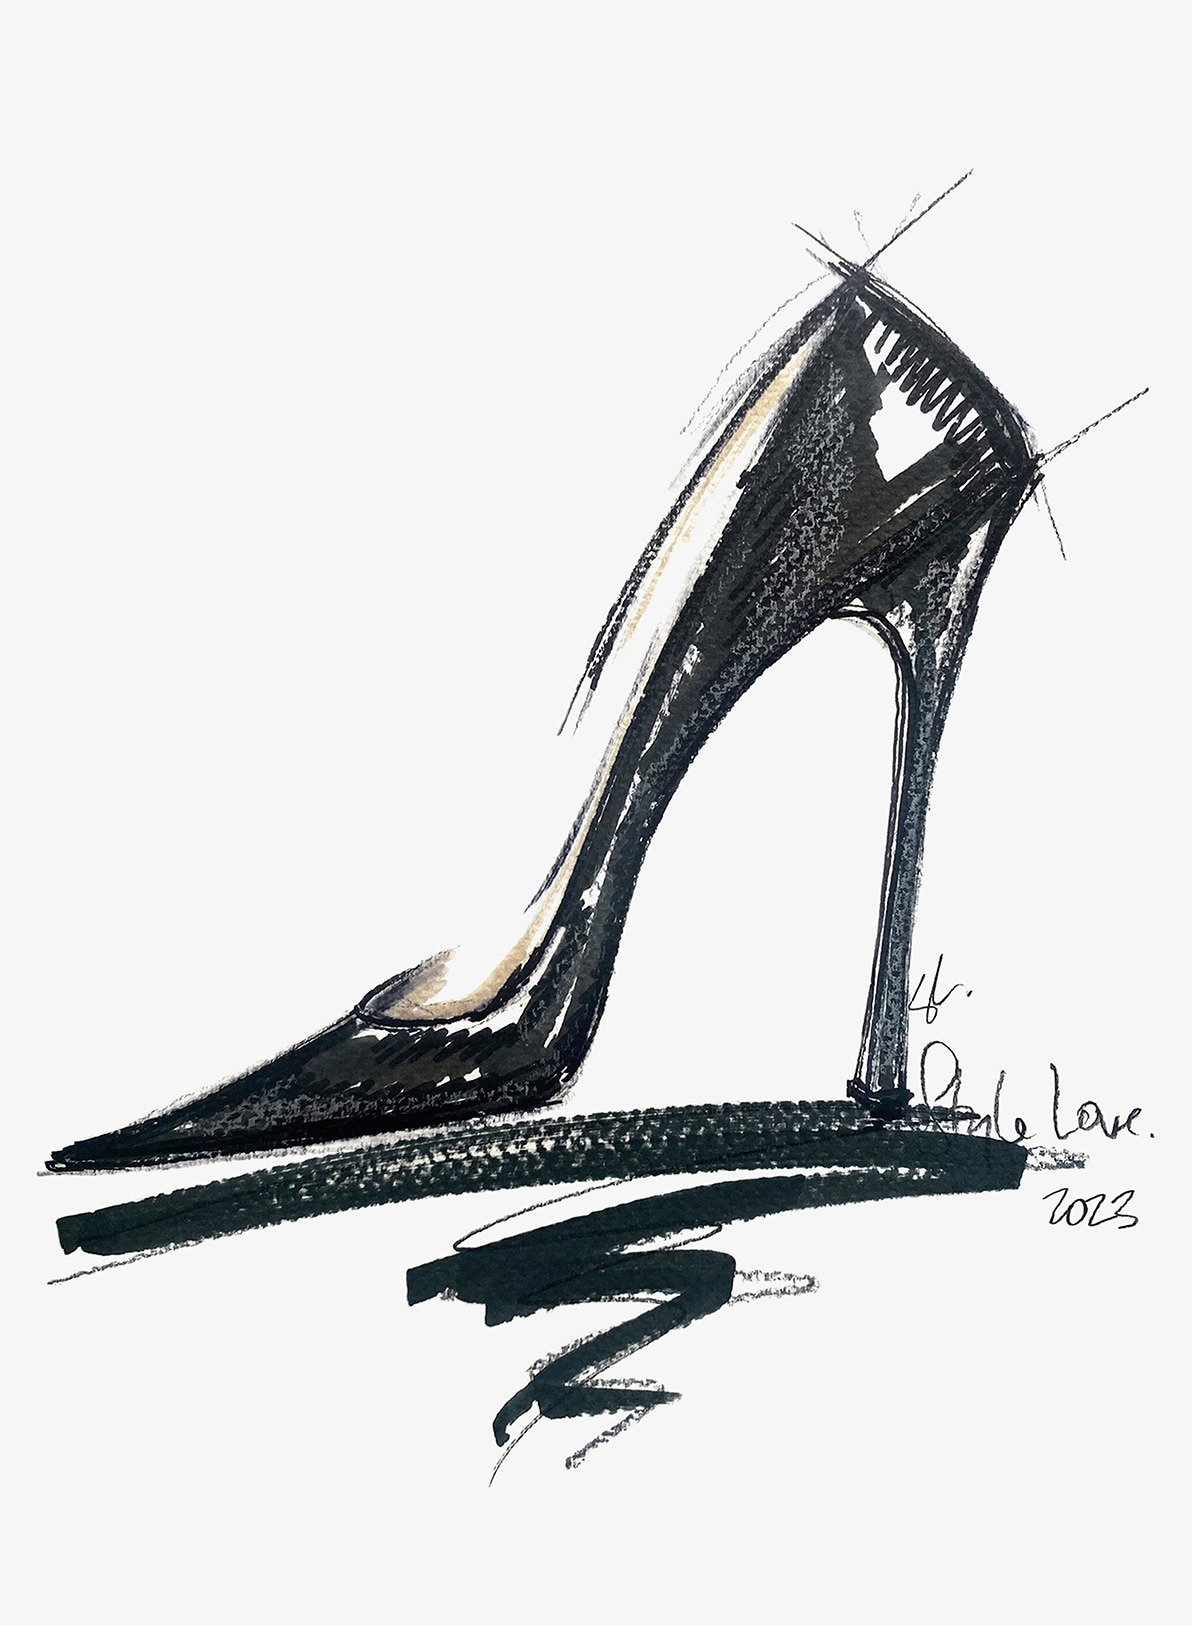 The Icons | Iconic Shoes and Handbags | JIMMY CHOO